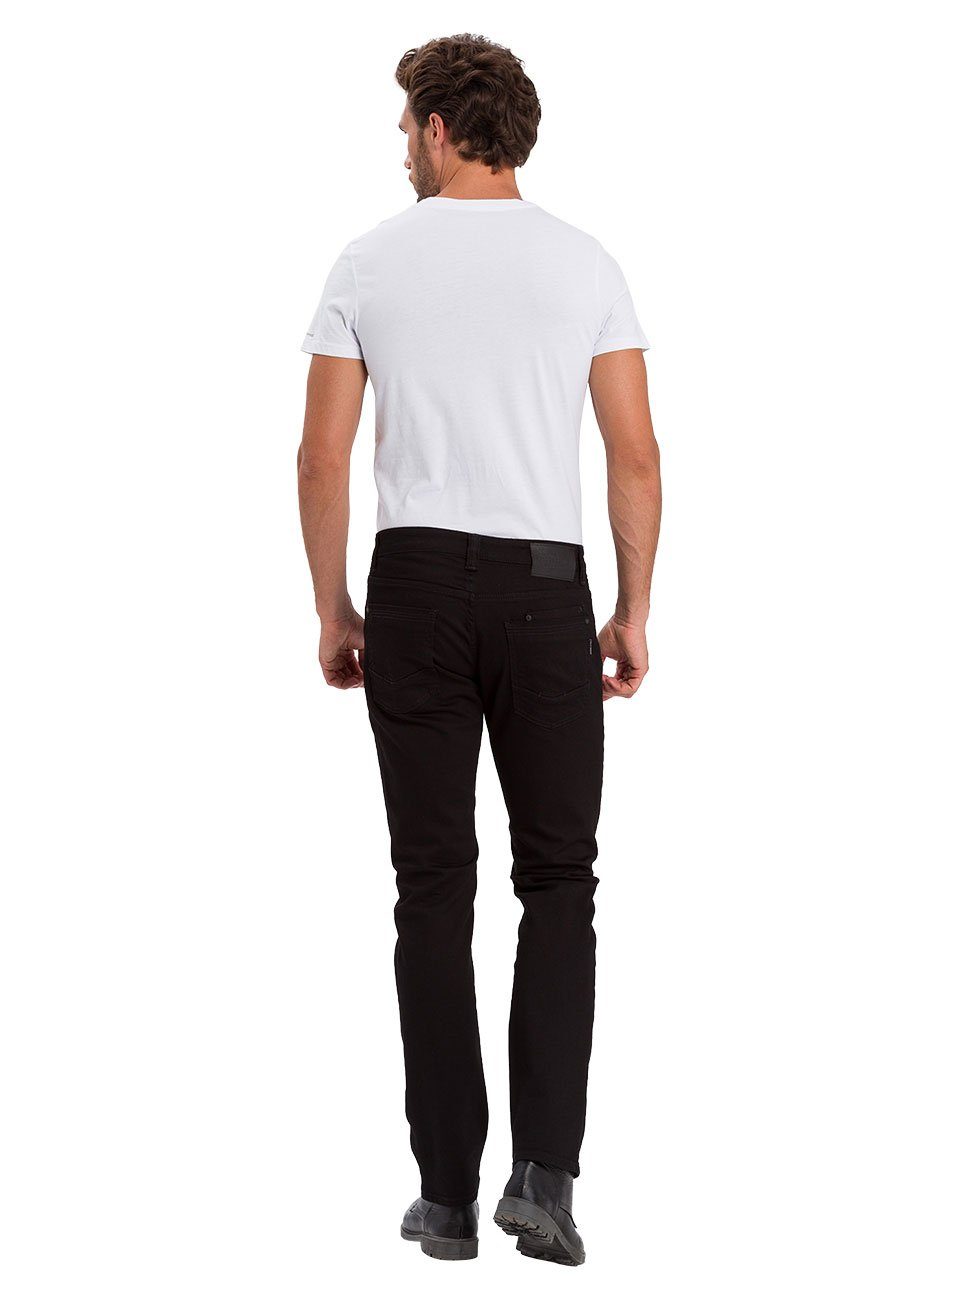 Dylan Jeanshose Straight-Jeans mit Stretch JEANS® CROSS